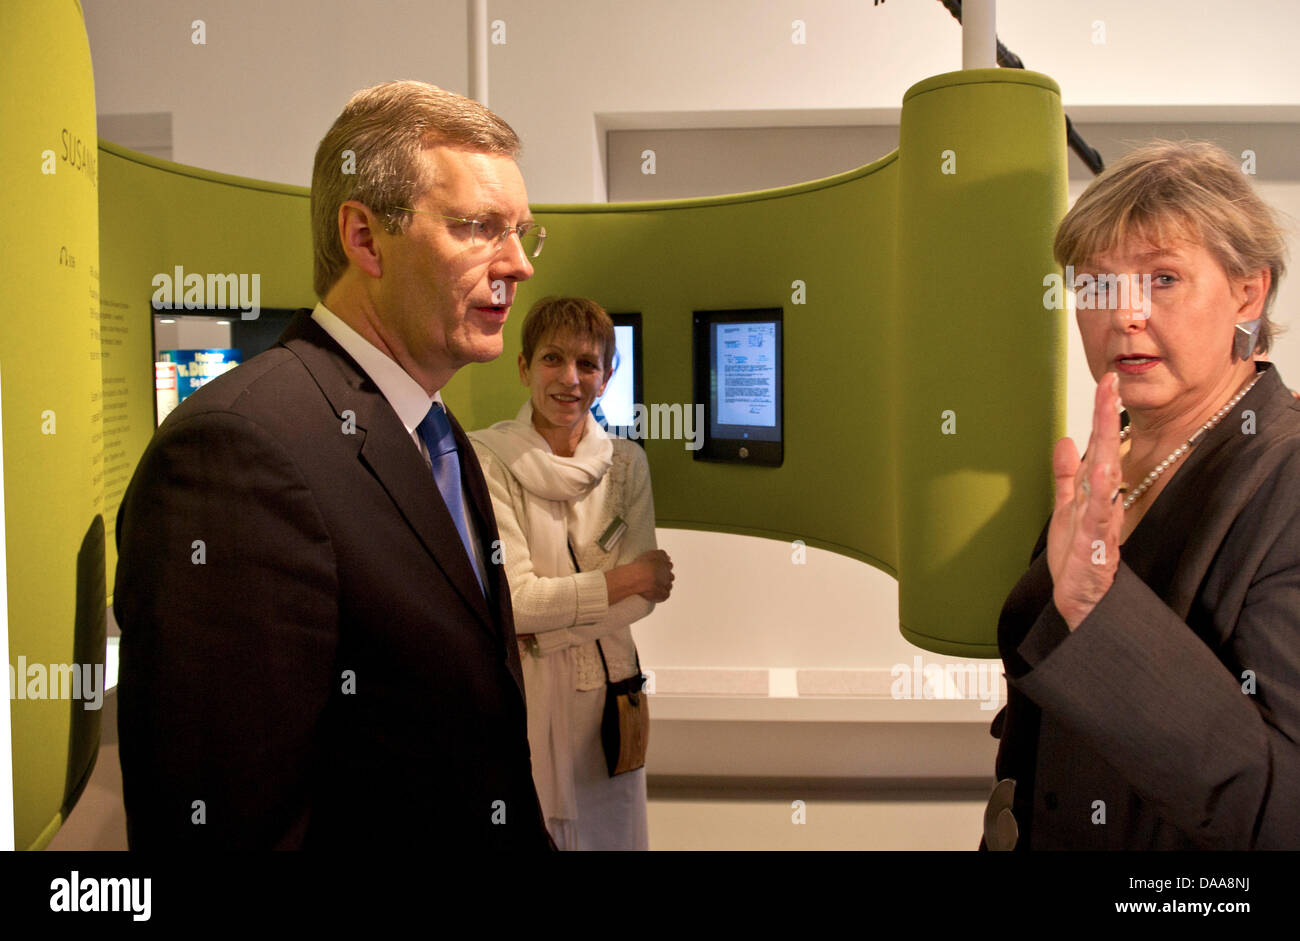 German Federal President Christian Wulff (L) and the Federal Commissioner for the Stasi Archives Marianne Birthler (R) speak with each other at the opening of the permanent exhibition about the Stasi in Berlin, Germany, 15 January 2011. In an area over 260 square meters, visitors to the educational exhibition can learn about the history of the Stasi and how it tried to penetrate in Stock Photo